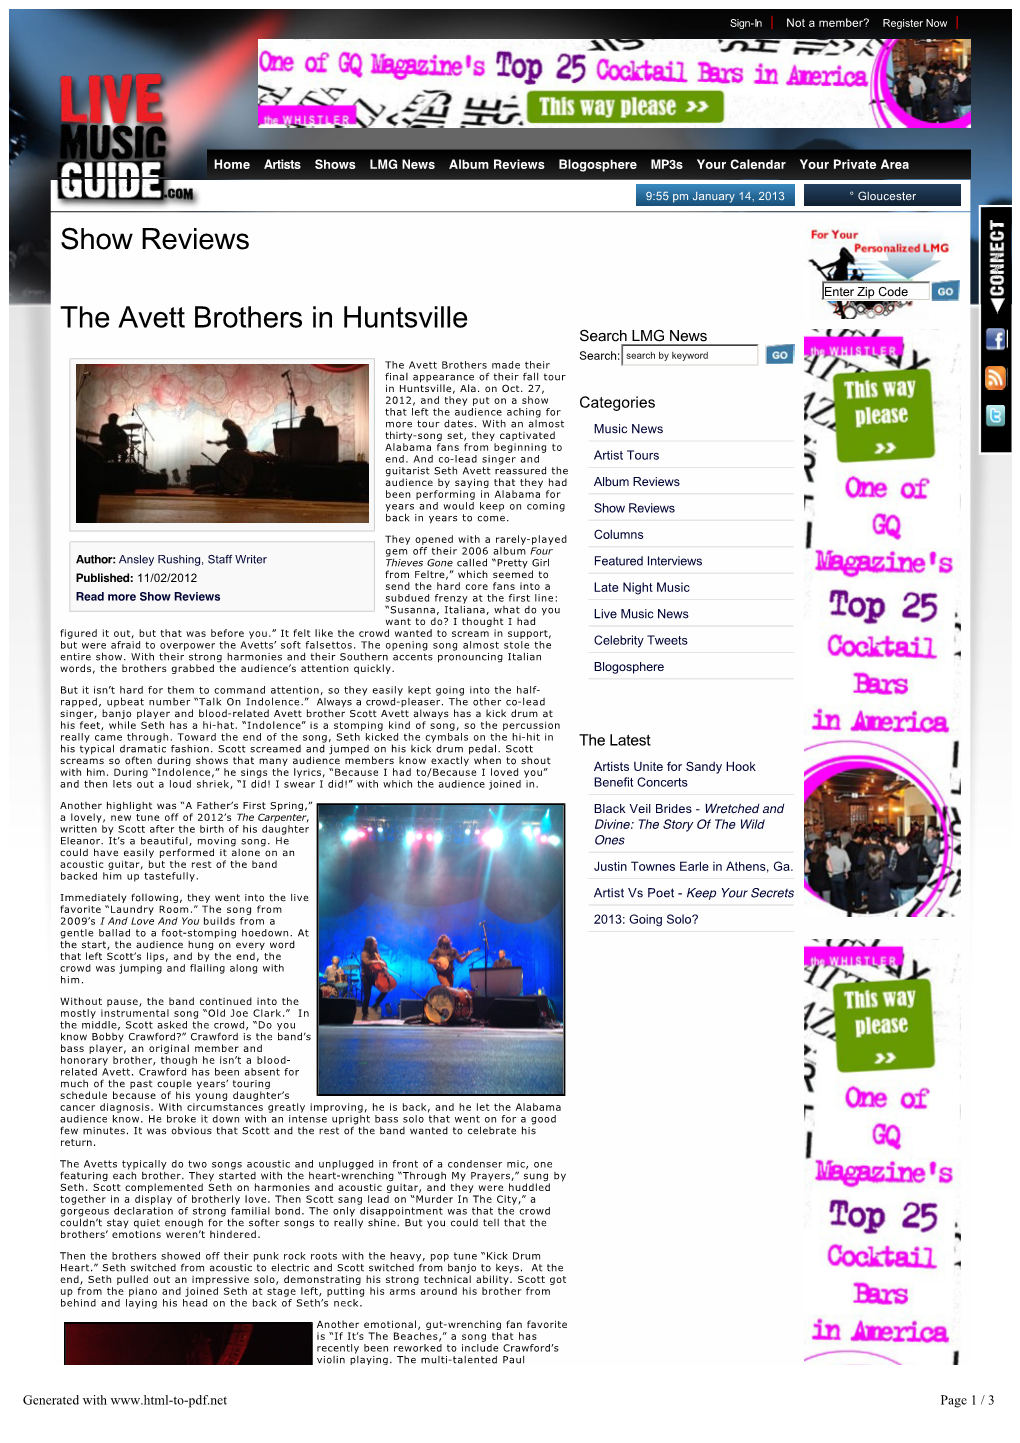 The Avett Brothers in Huntsville Search LMG News Search: Search by Keyword the Avett Brothers Made Their Final Appearance of Their Fall Tour in Huntsville, Ala